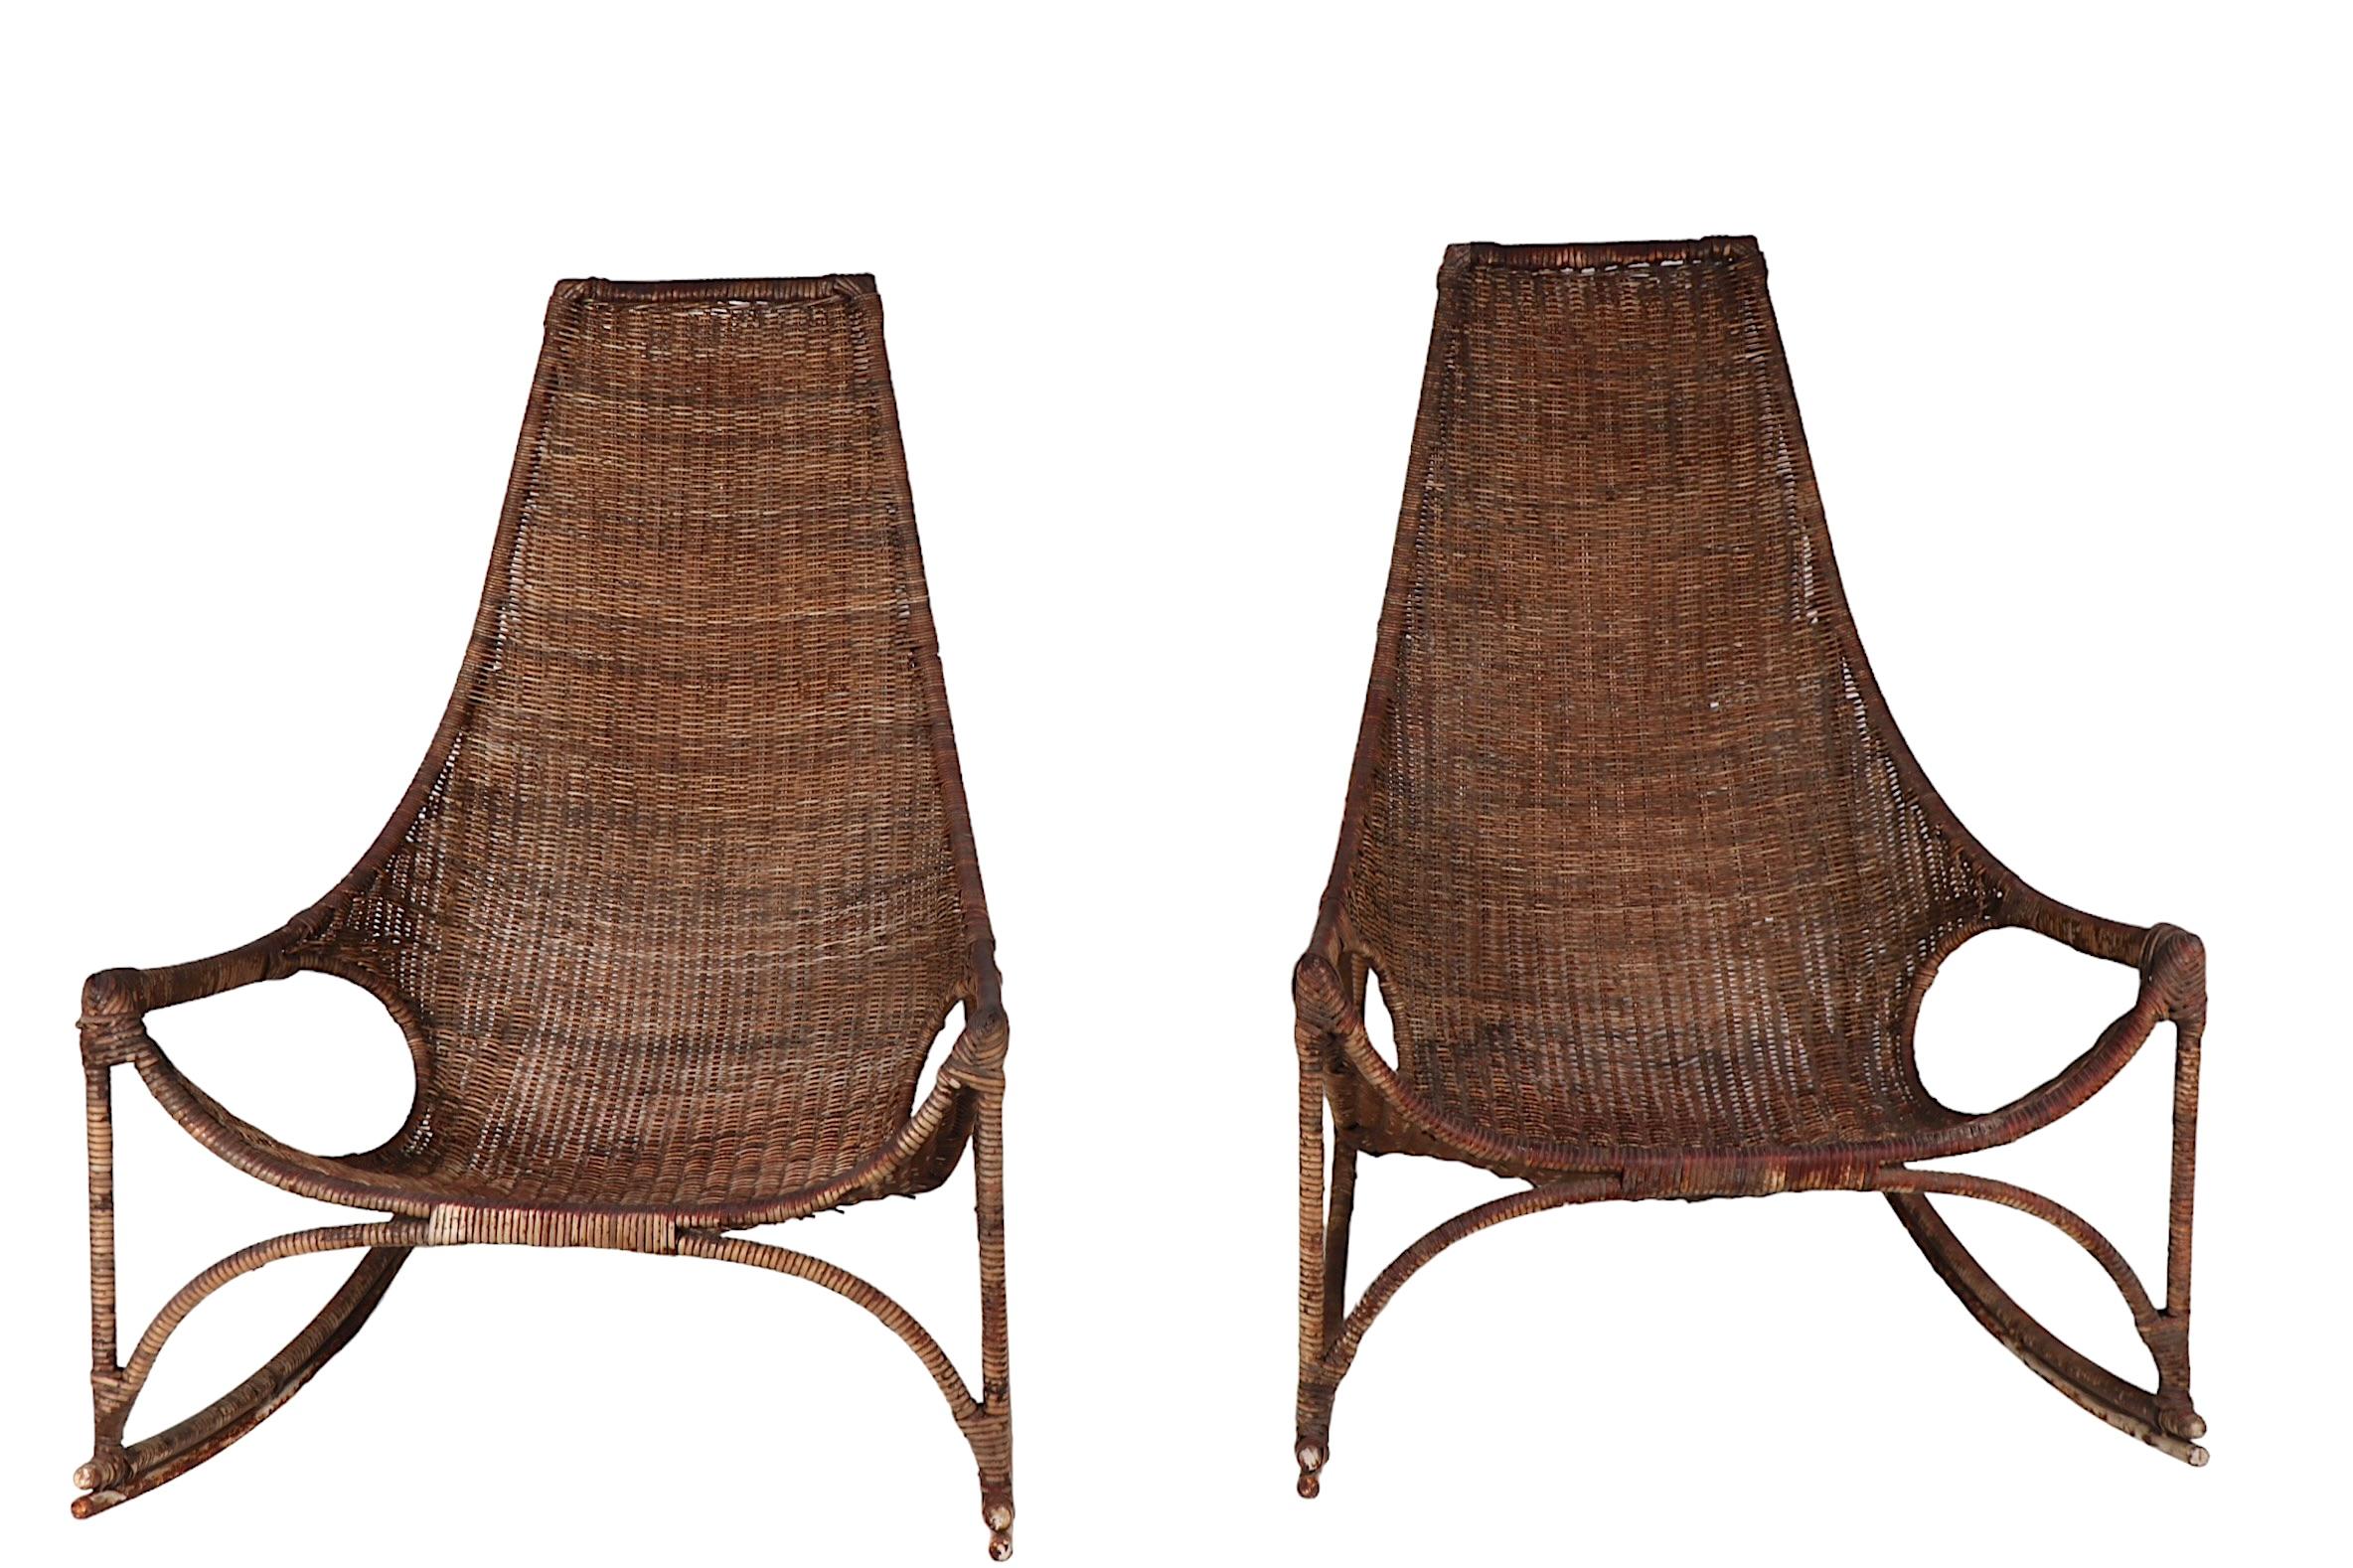 American Pr. Wicker Rocking Chairs by Francis Mair c 1950/1960's For Sale